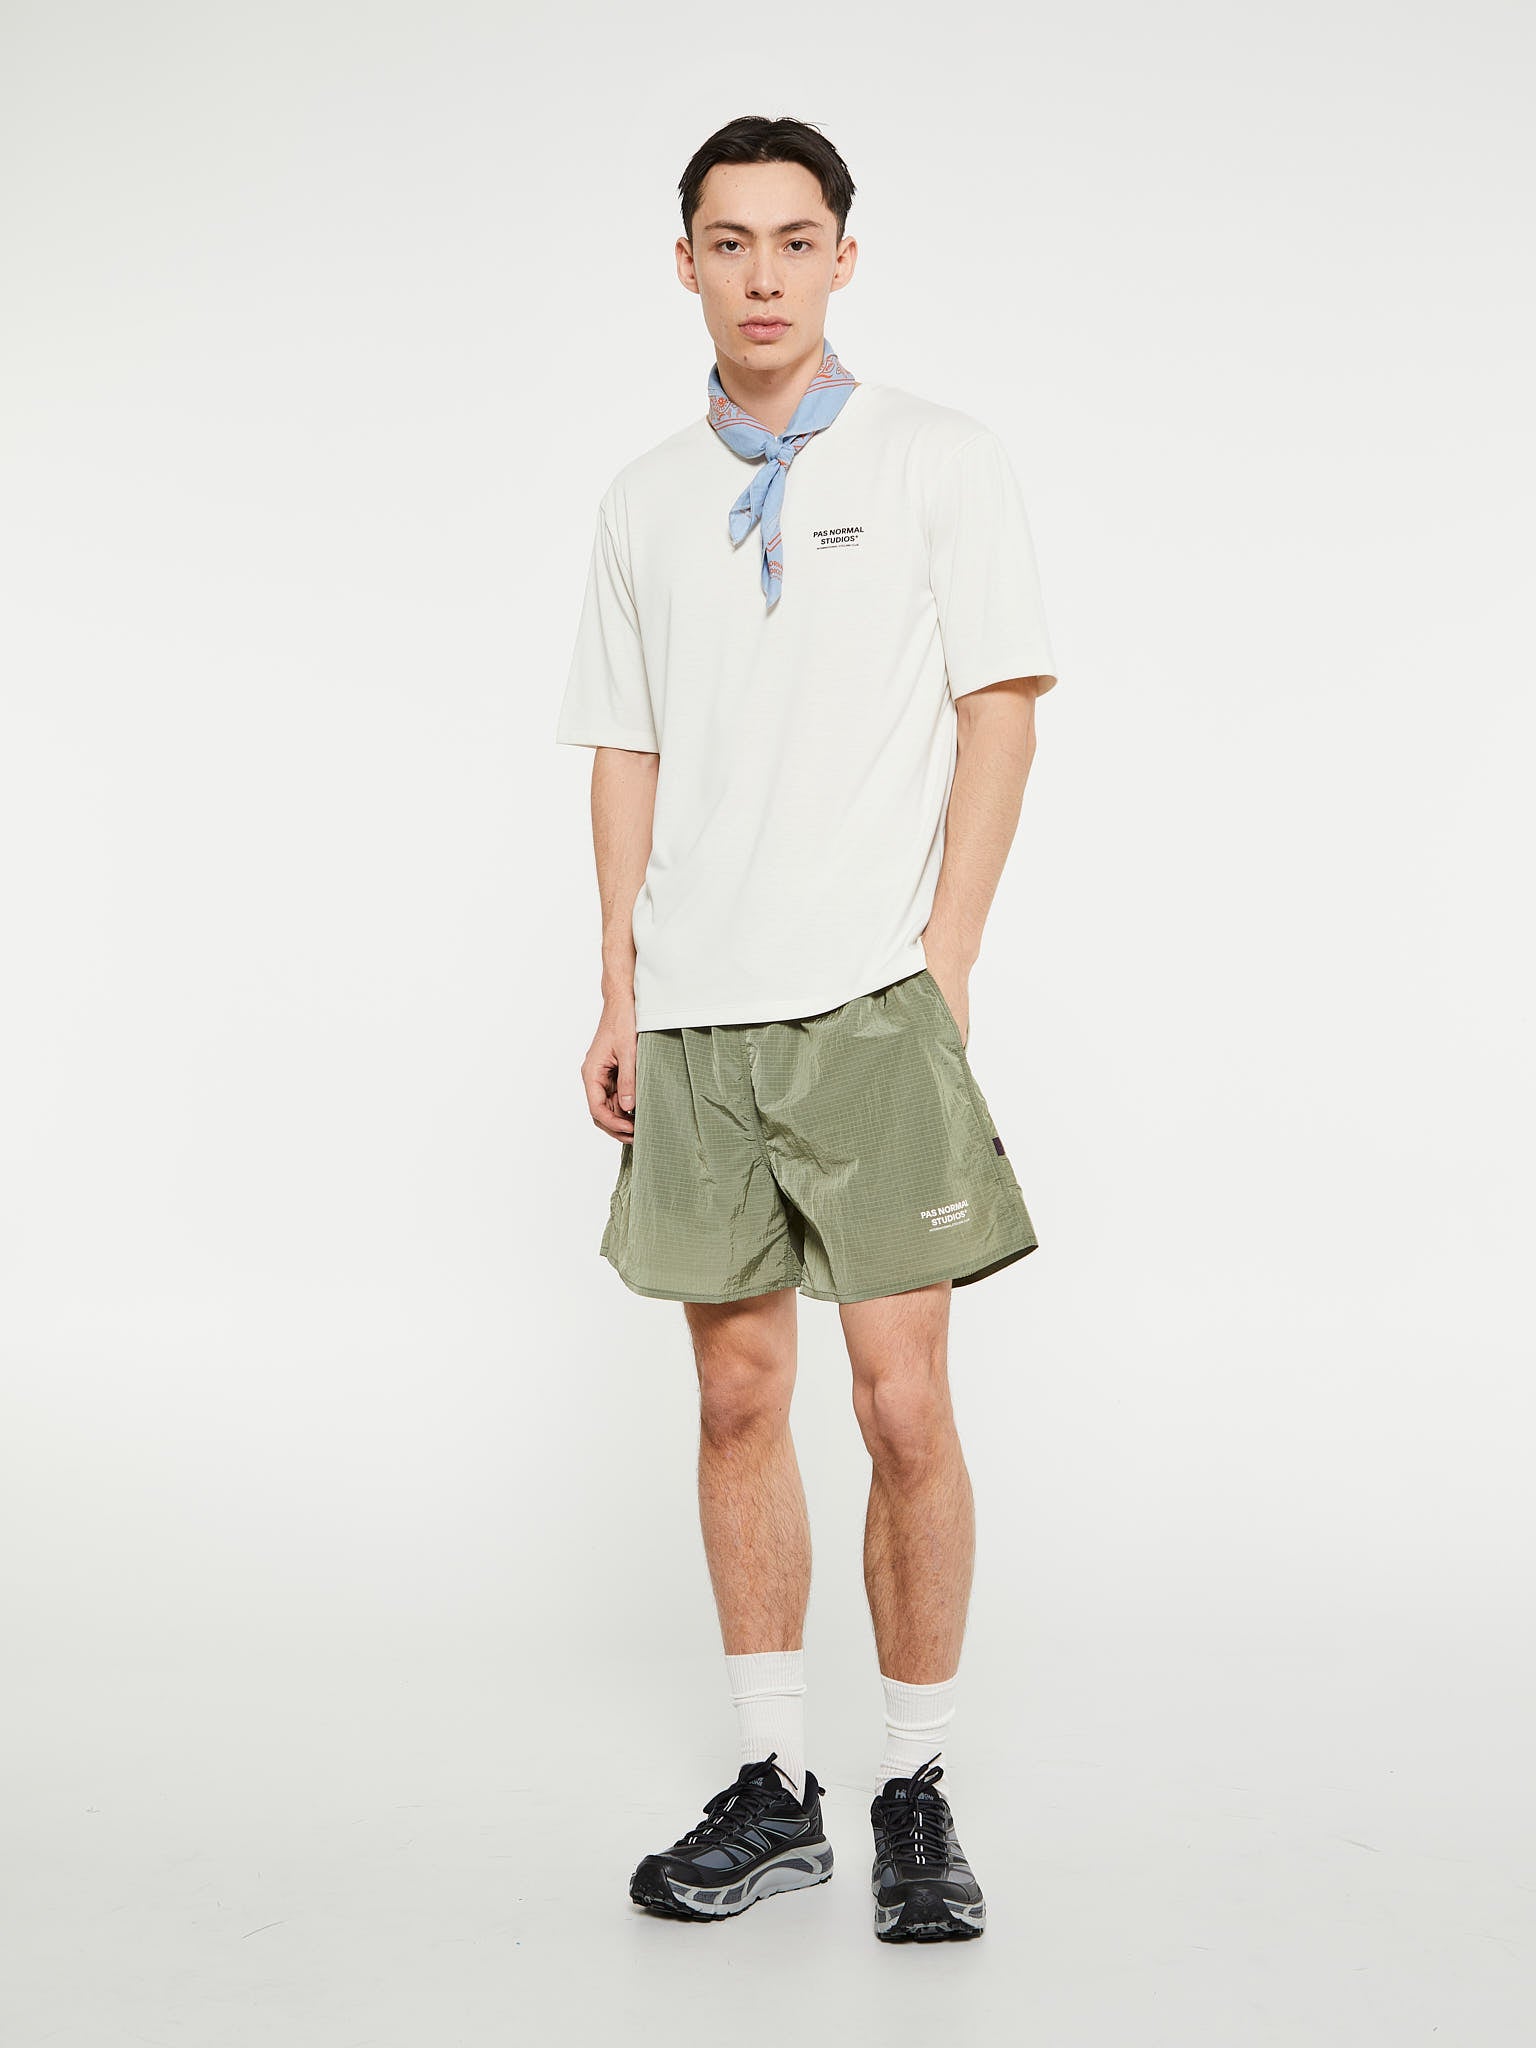 Off-Race Ripstop Shorts in Army Green